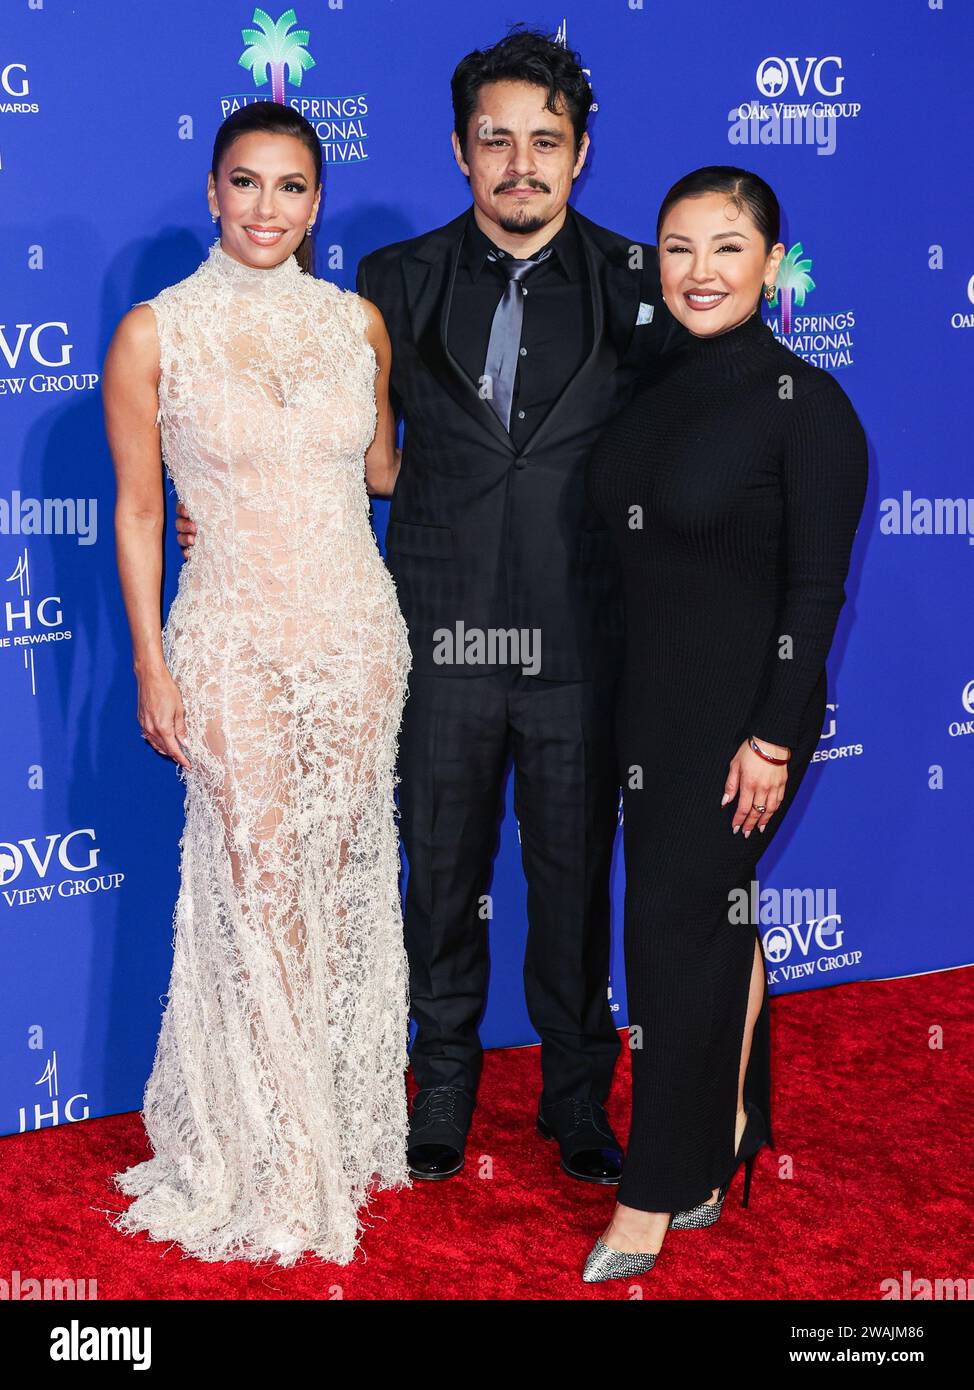 PALM SPRINGS, RIVERSIDE COUNTY, CALIFORNIA, USA - JANUARY 04: Eva Longoria, Jesse Garcia and Annie Gonzalez arrive at the 35th Annual Palm Springs International Film Festival Film Awards held at the Palm Springs Convention Center on January 4, 2024 in Palm Springs, Riverside County, California, United States. (Photo by Xavier Collin/Image Press Agency) Stock Photo